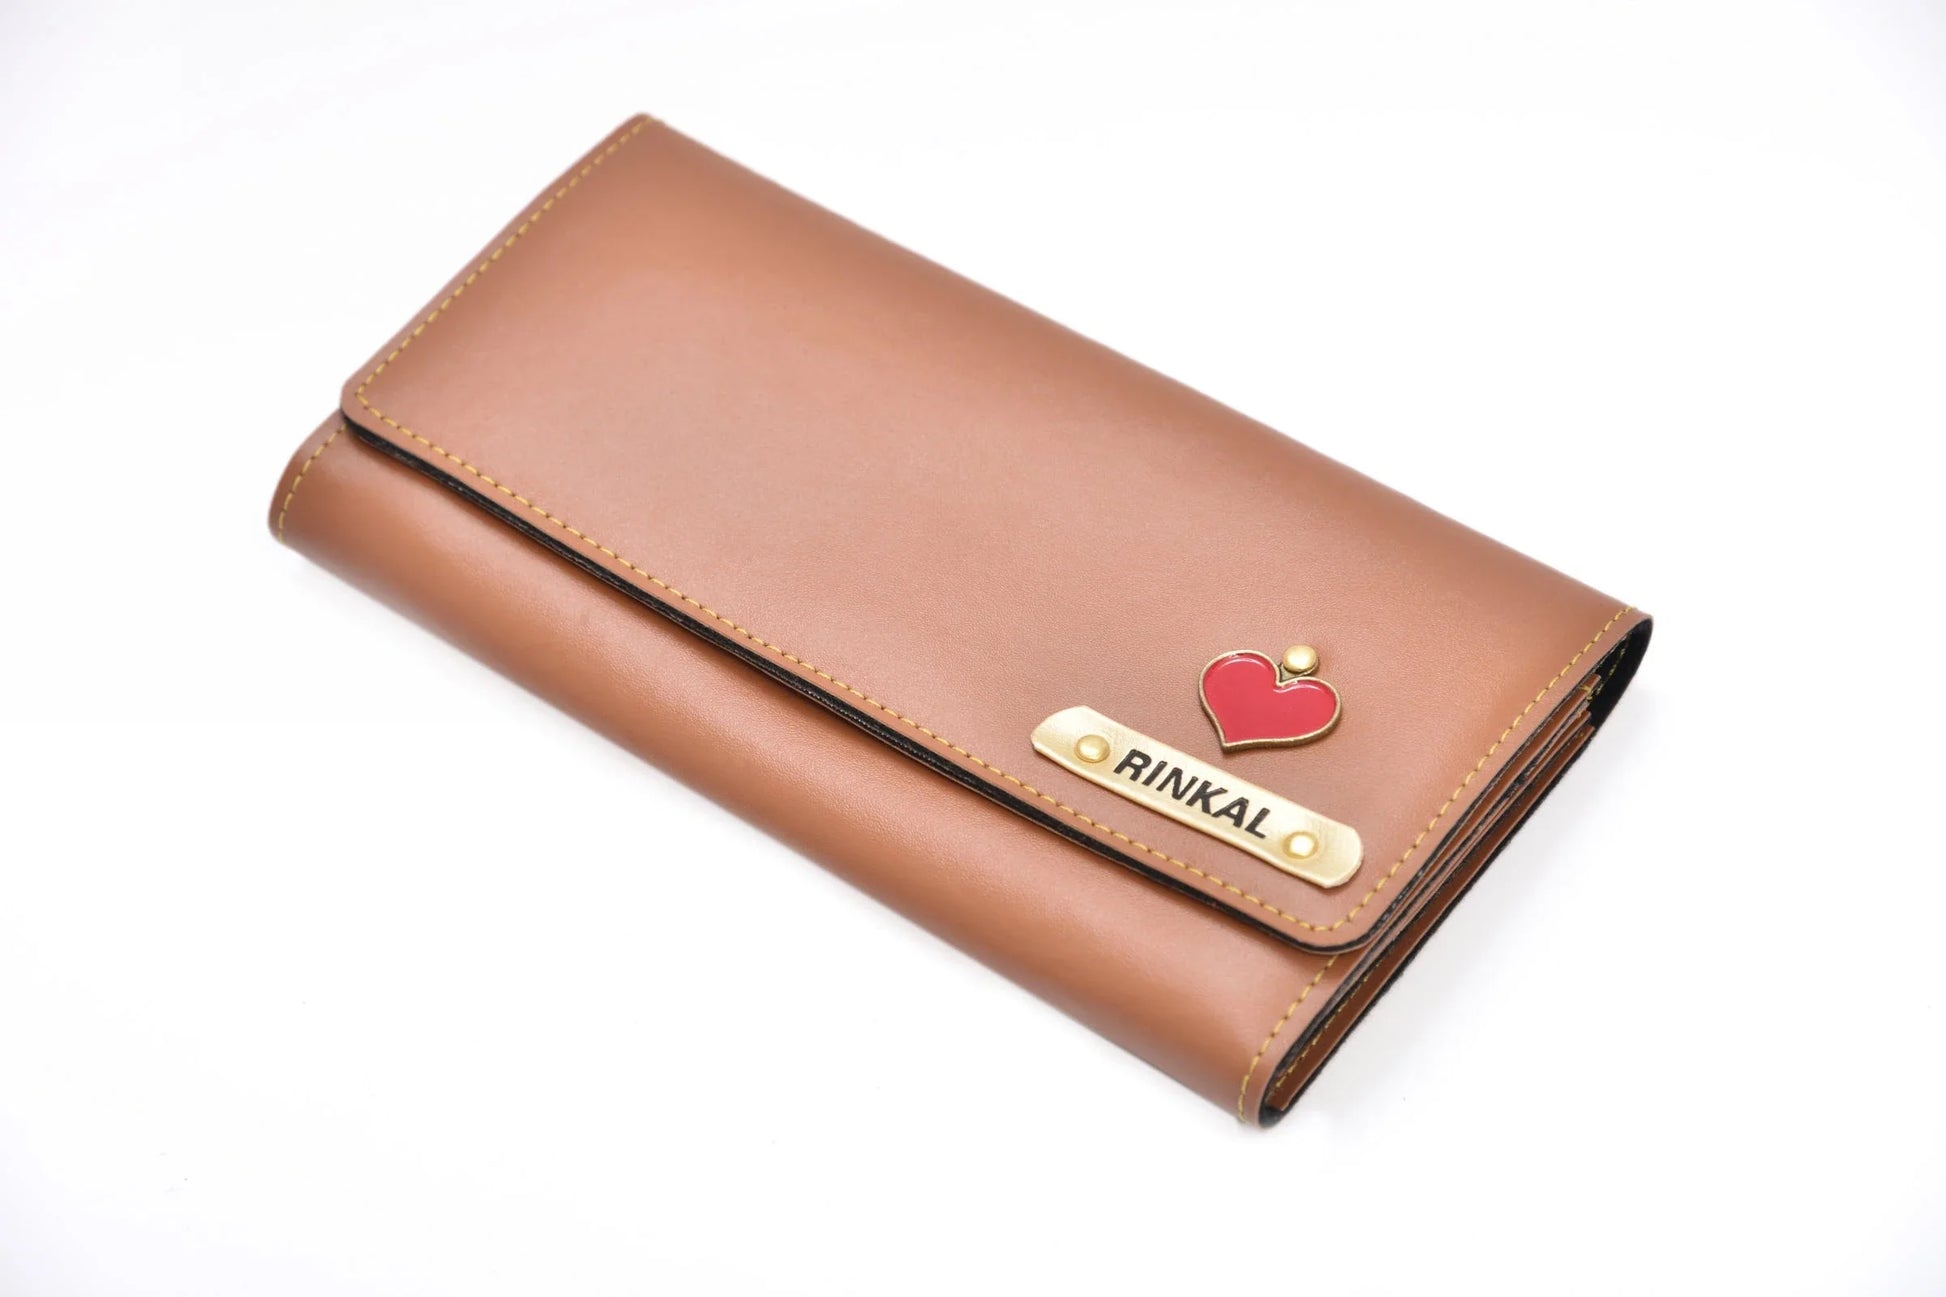 Made from high-quality materials and featuring practical features like multiple card slots and a coin compartment, our wallets are perfect for everyday use.